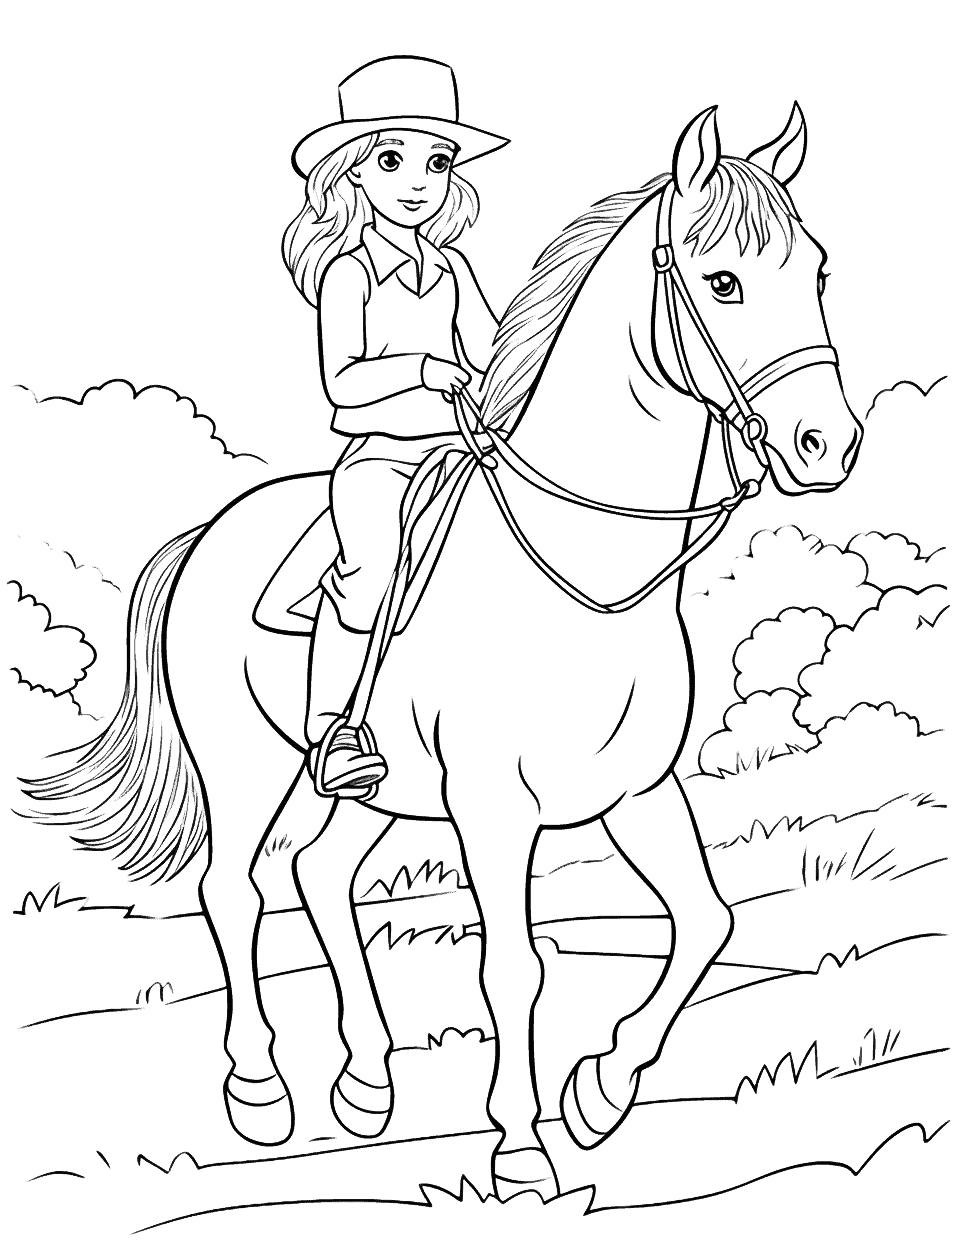 Rider on the Trail Coloring Page - A rider and her horse enjoying the great outdoors.